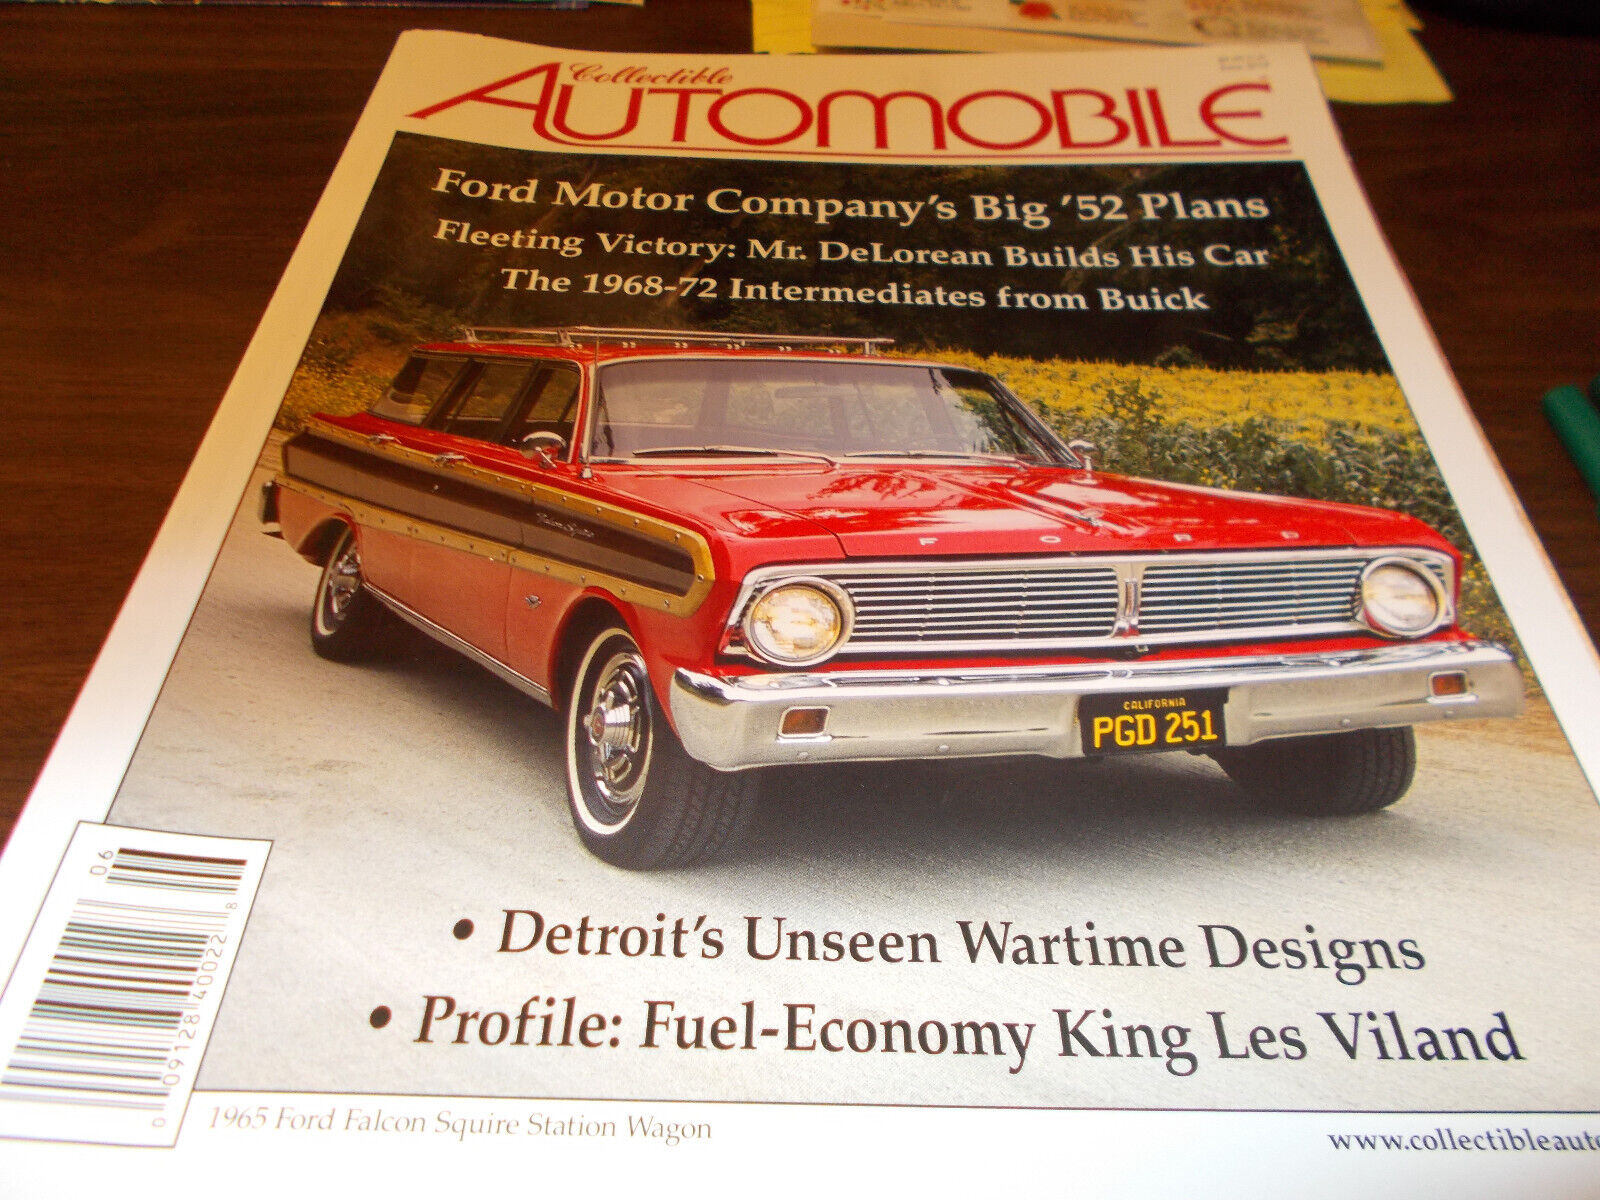 Collectible Automobile Magazine June 2018/Ford Motor 1952/1968-72 Midsize Buick